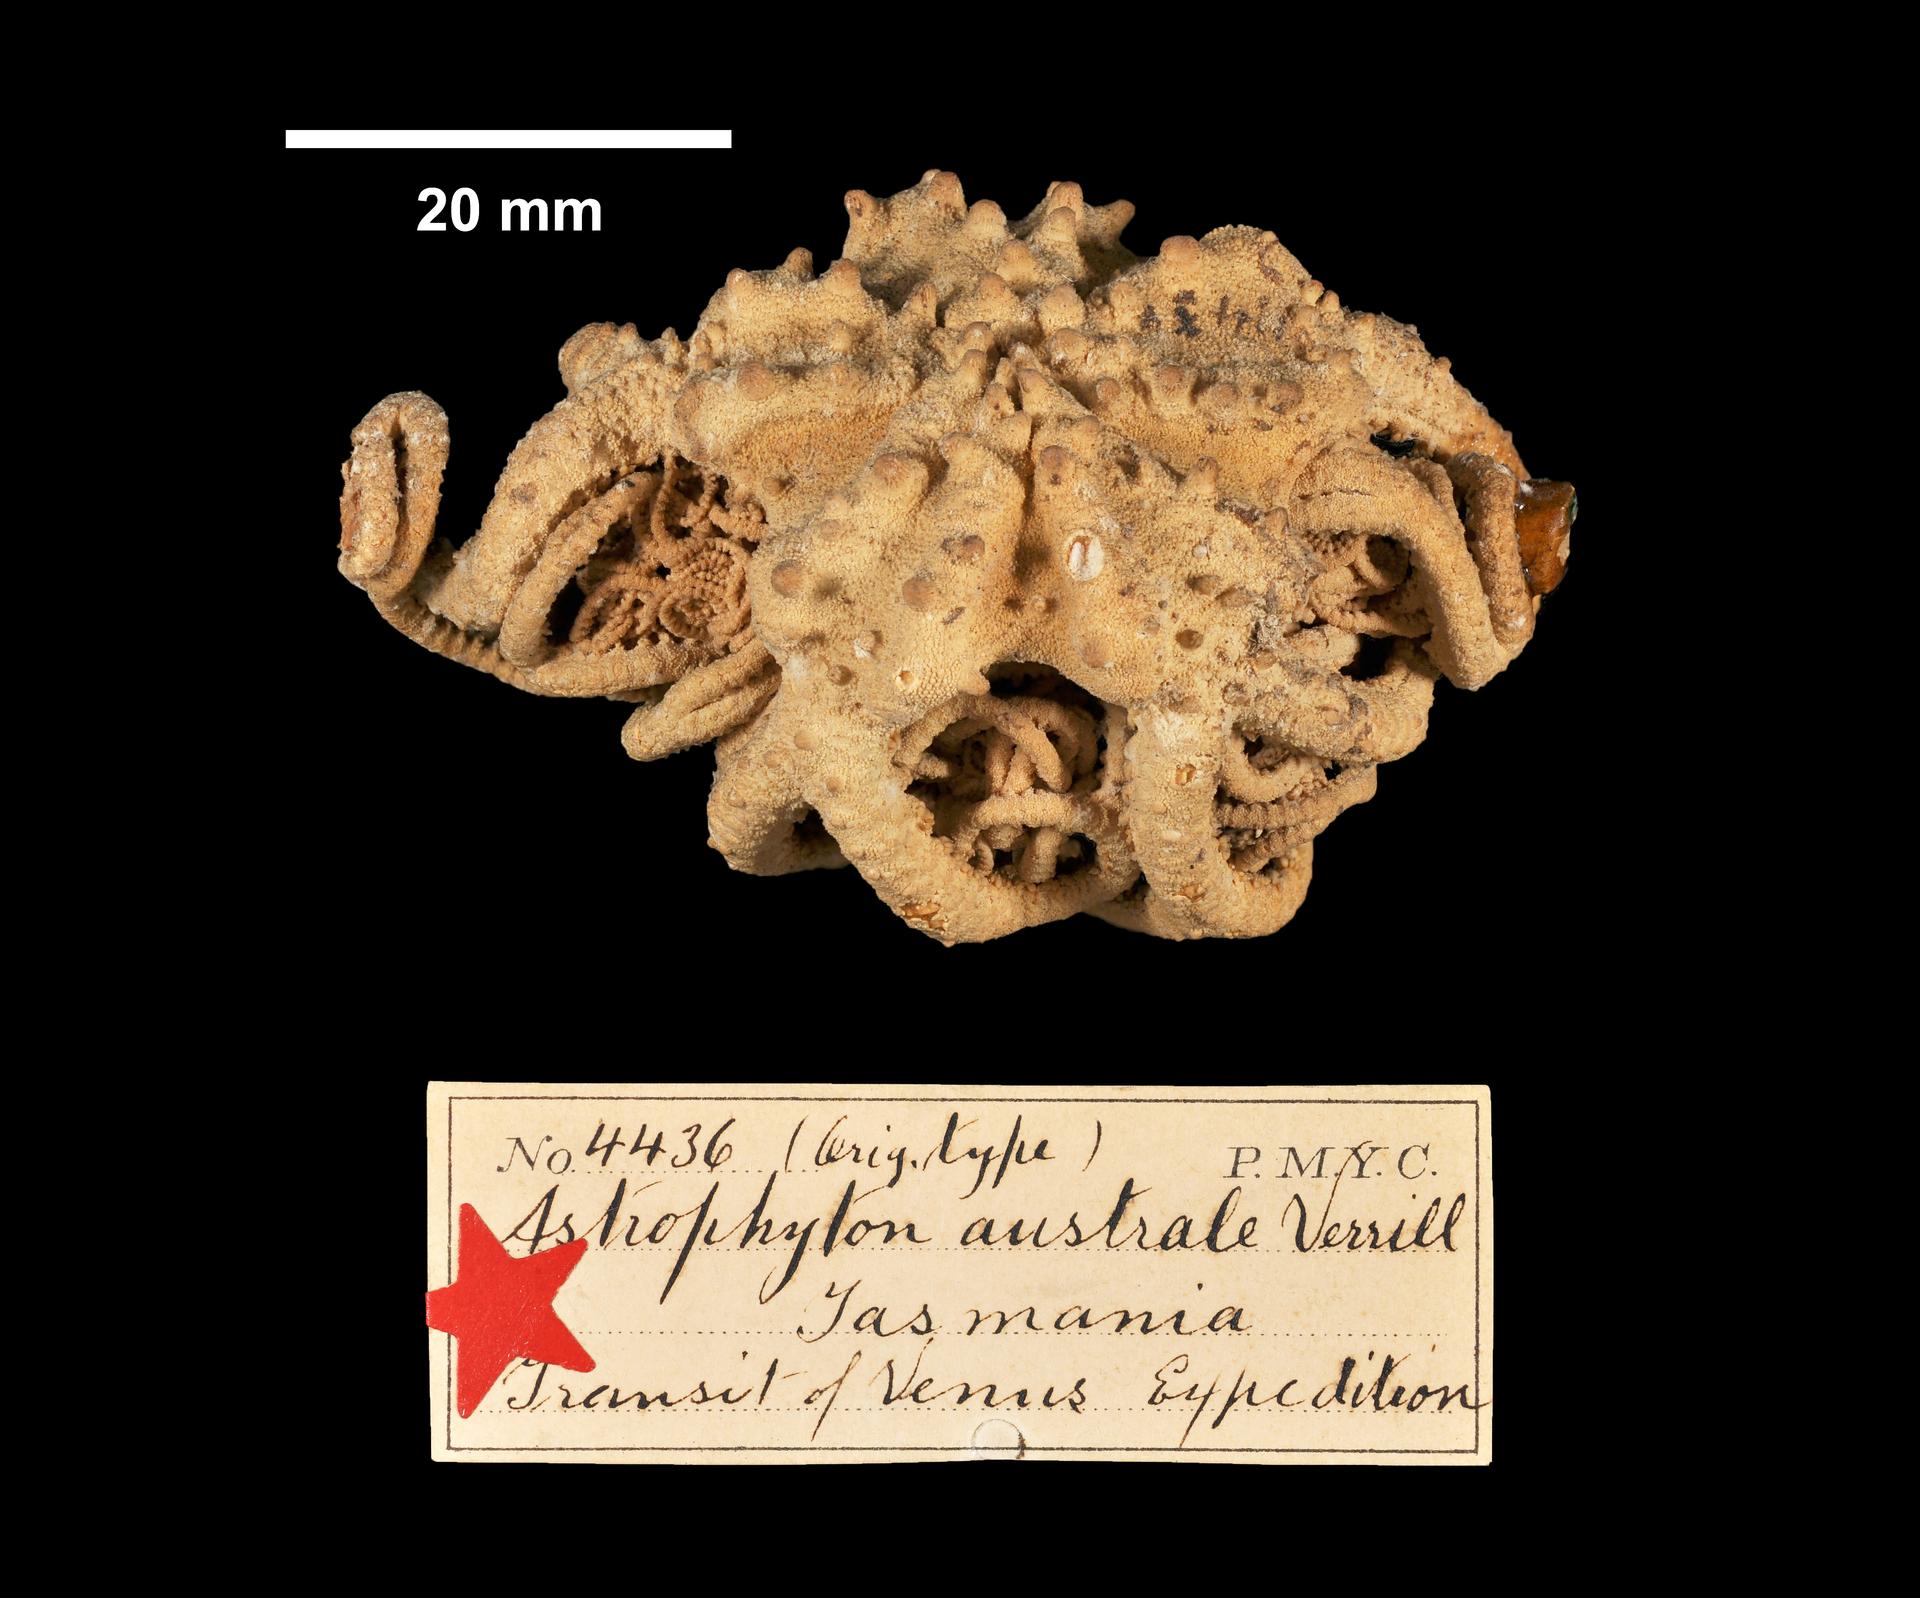 To Yale Peabody Museum of Natural History (YPM IZ 004436.EC)